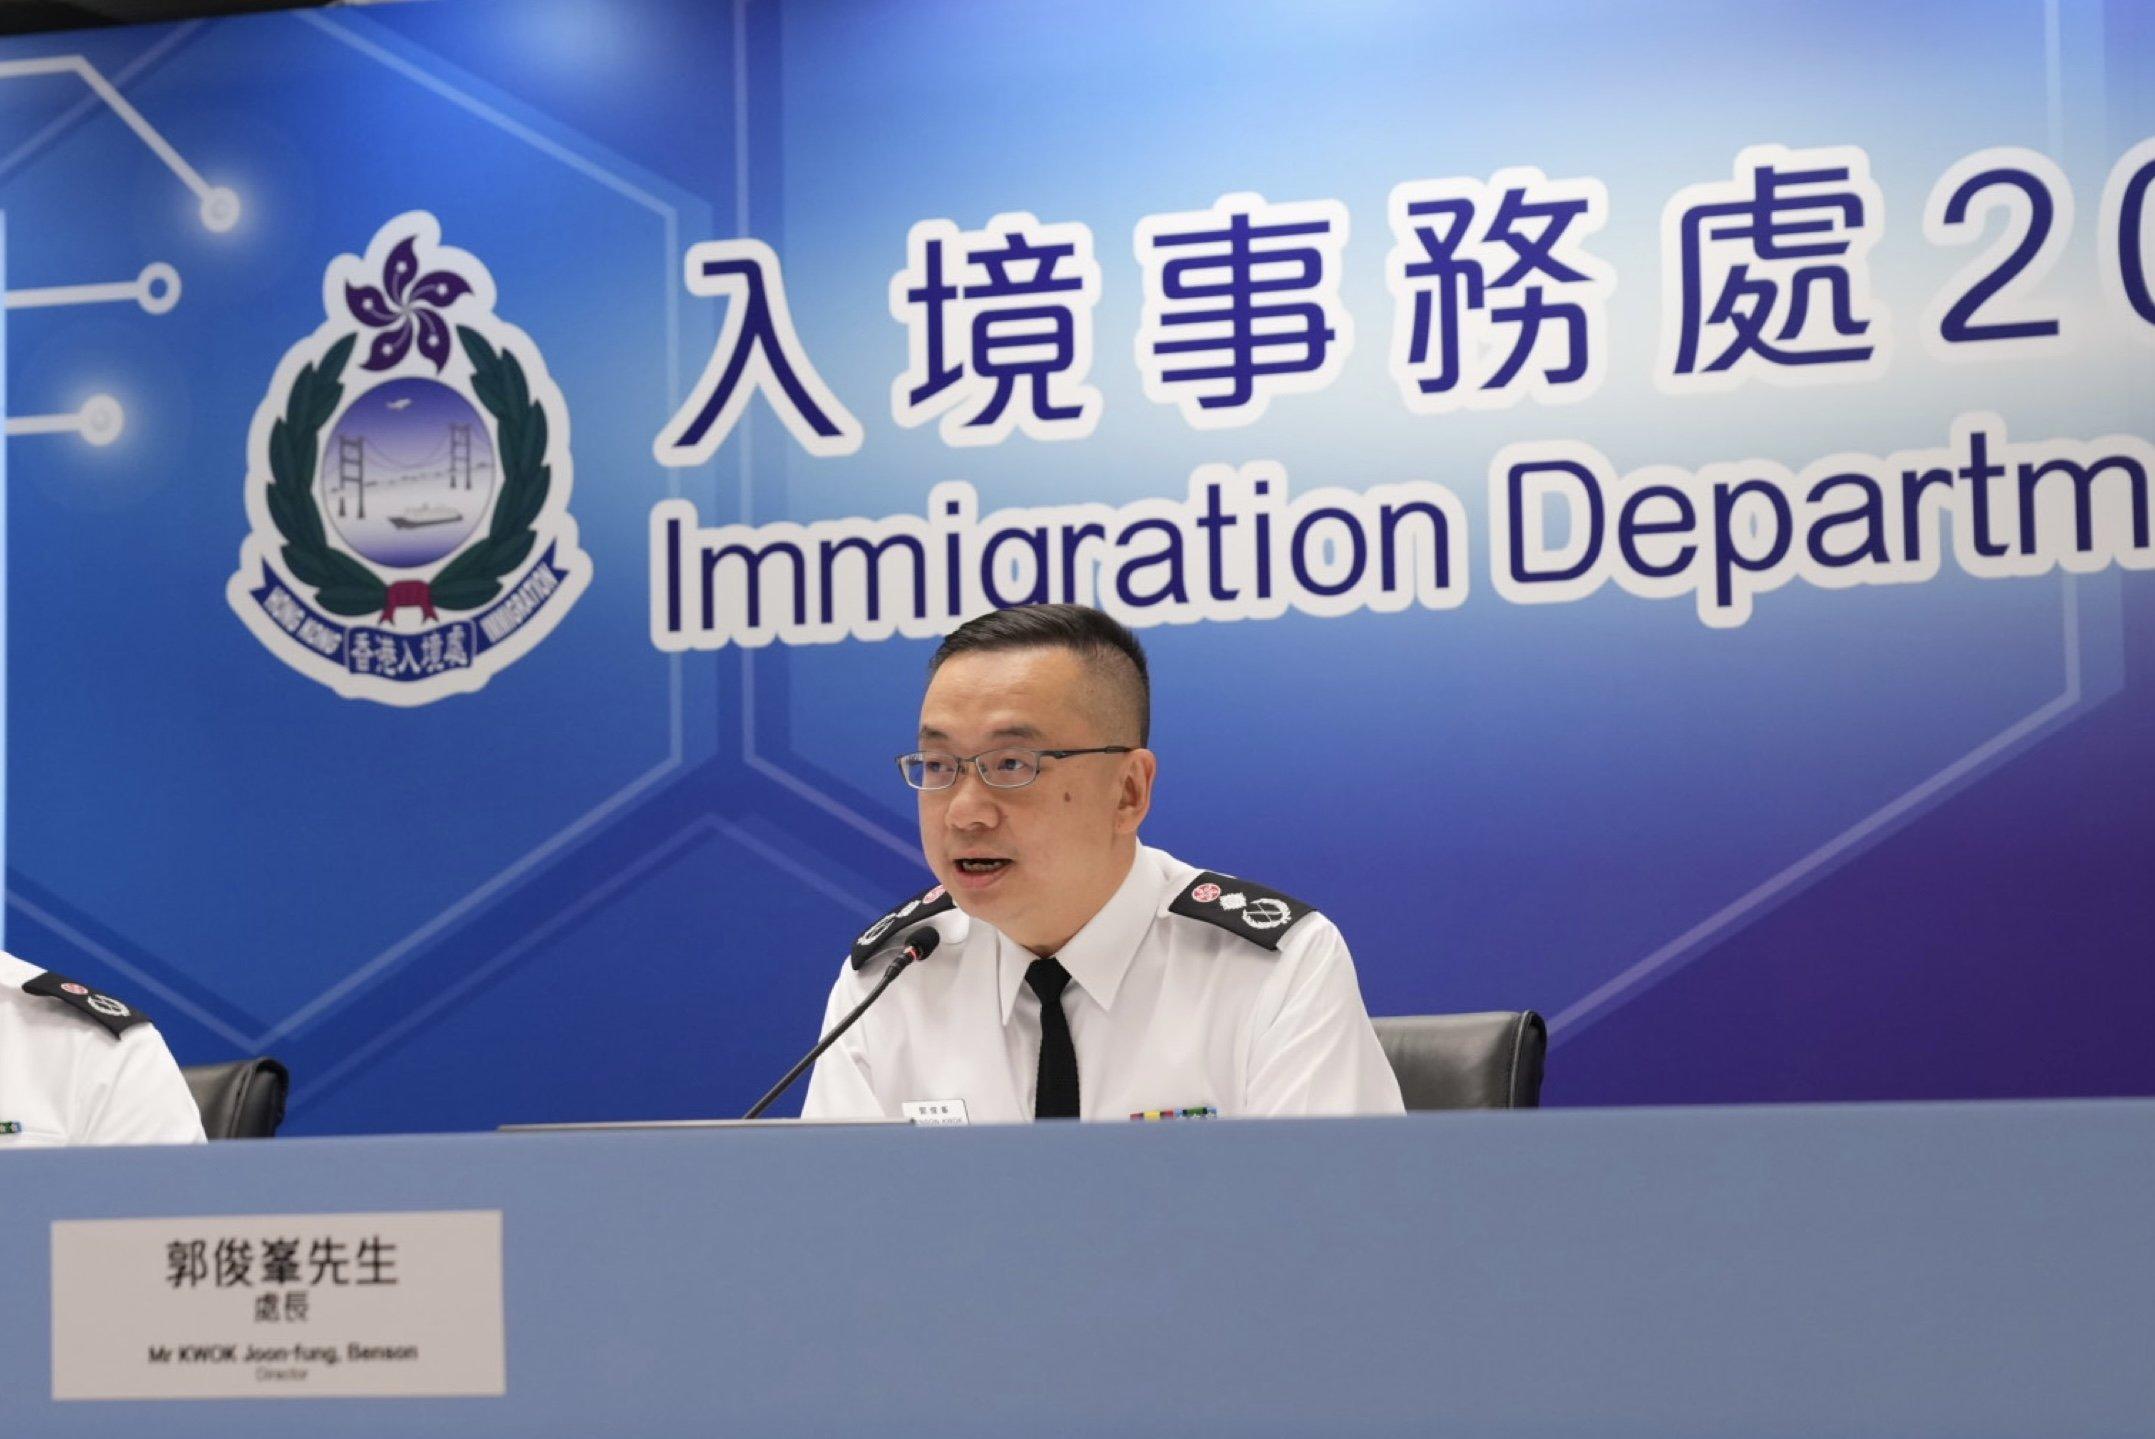 The Immigration Department's year-end review of 2023 was held today (February 8). Photos shows the Director of Immigration, Mr Benson Kwok, chairing the press conference.